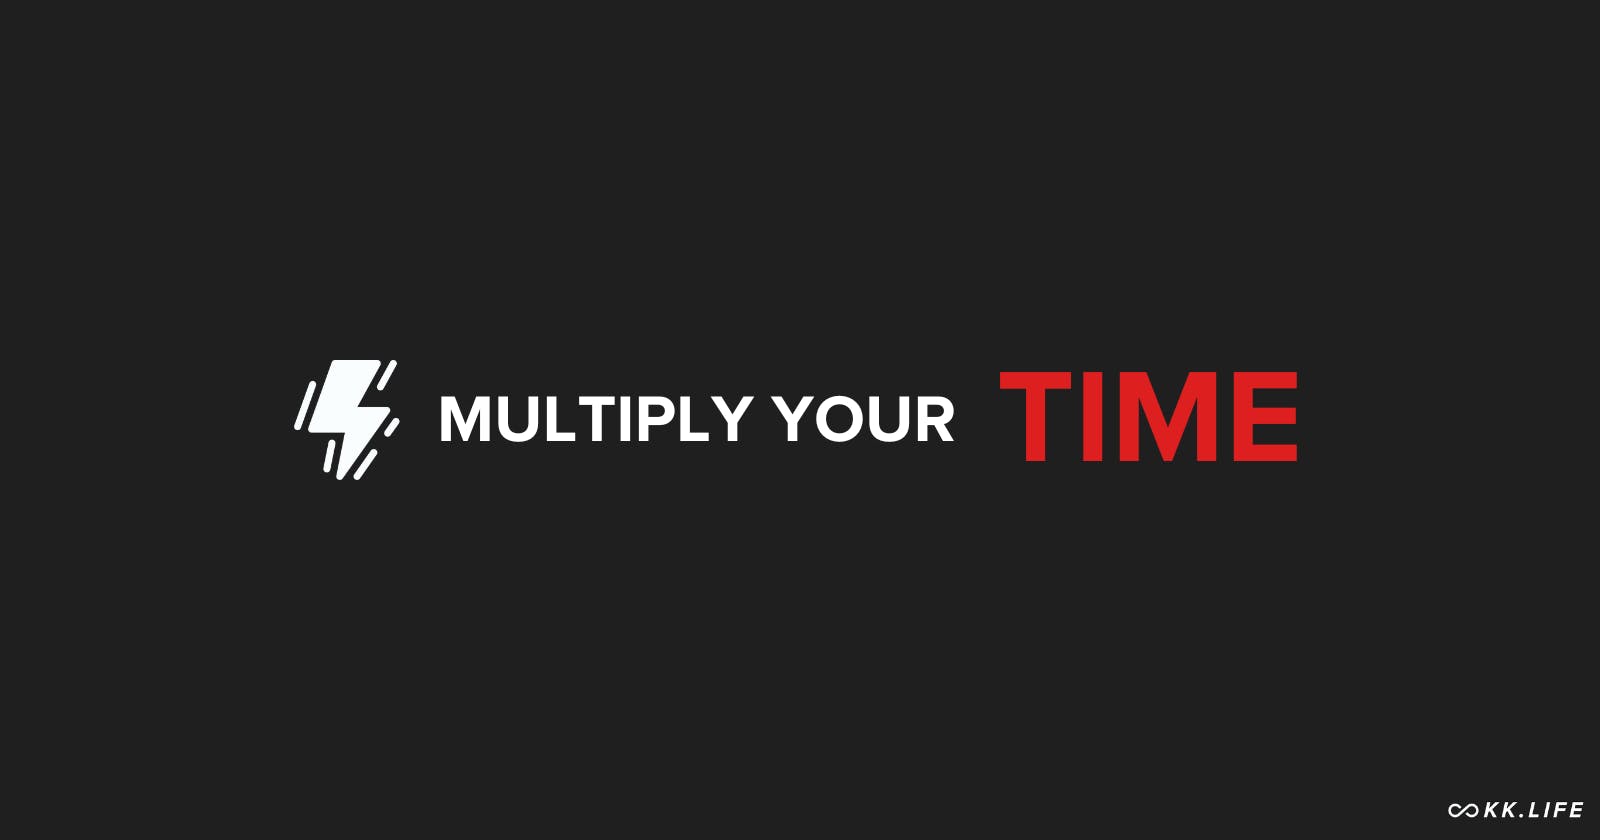 How to Manage Your Time More Effectively